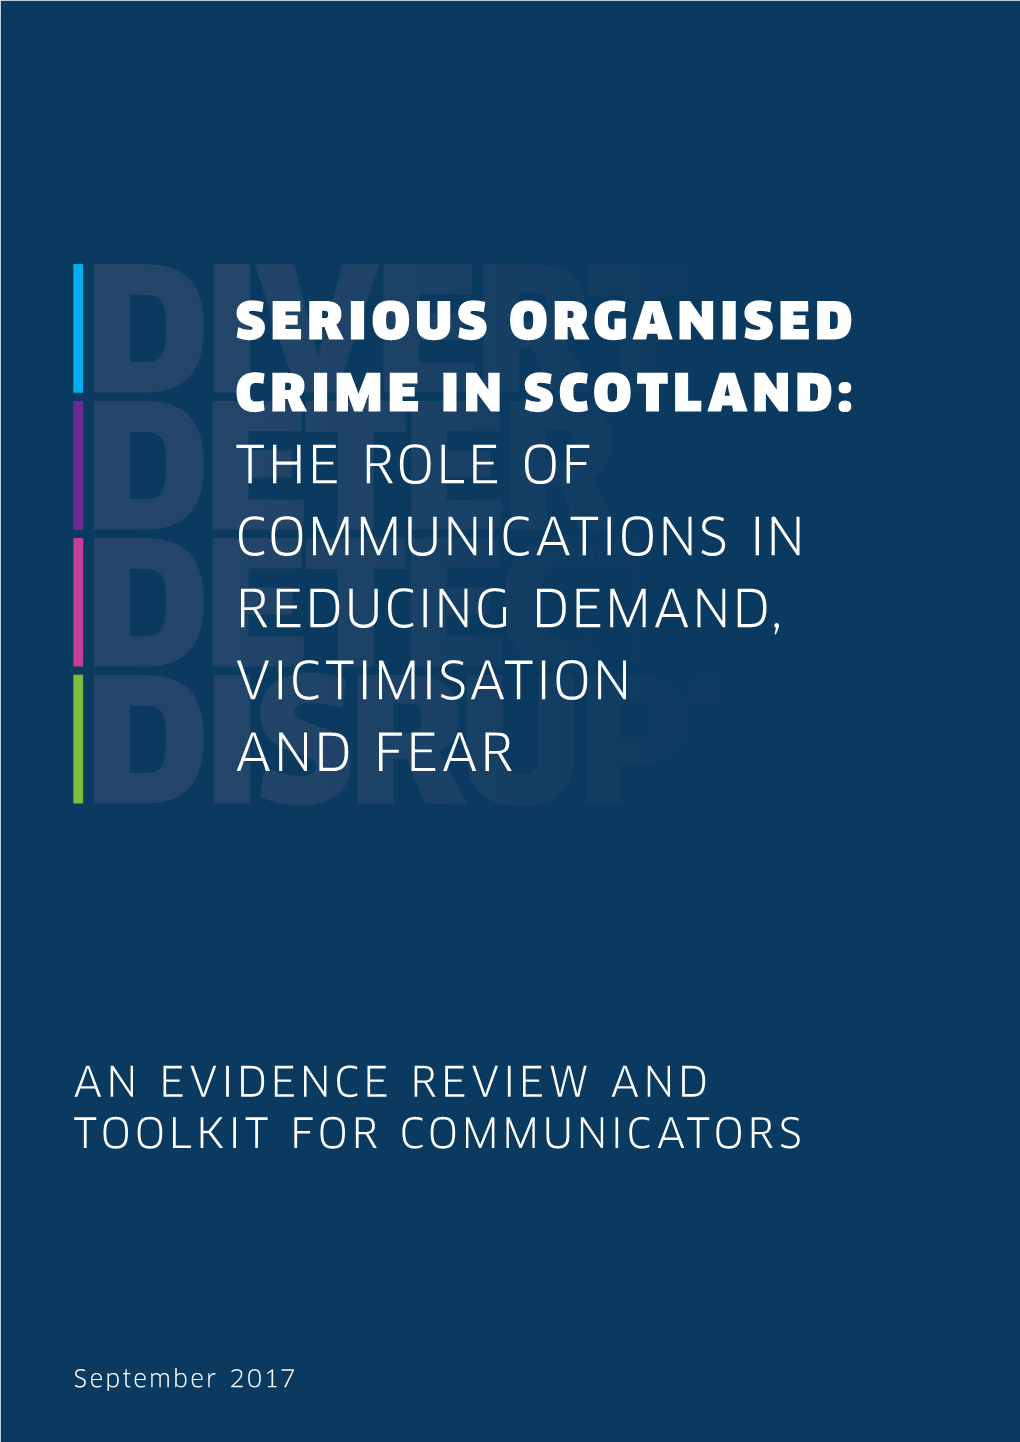 Serious Organised Crime in Scotland: the Role of Communications in Reducing Demand, Victimisation and Fear